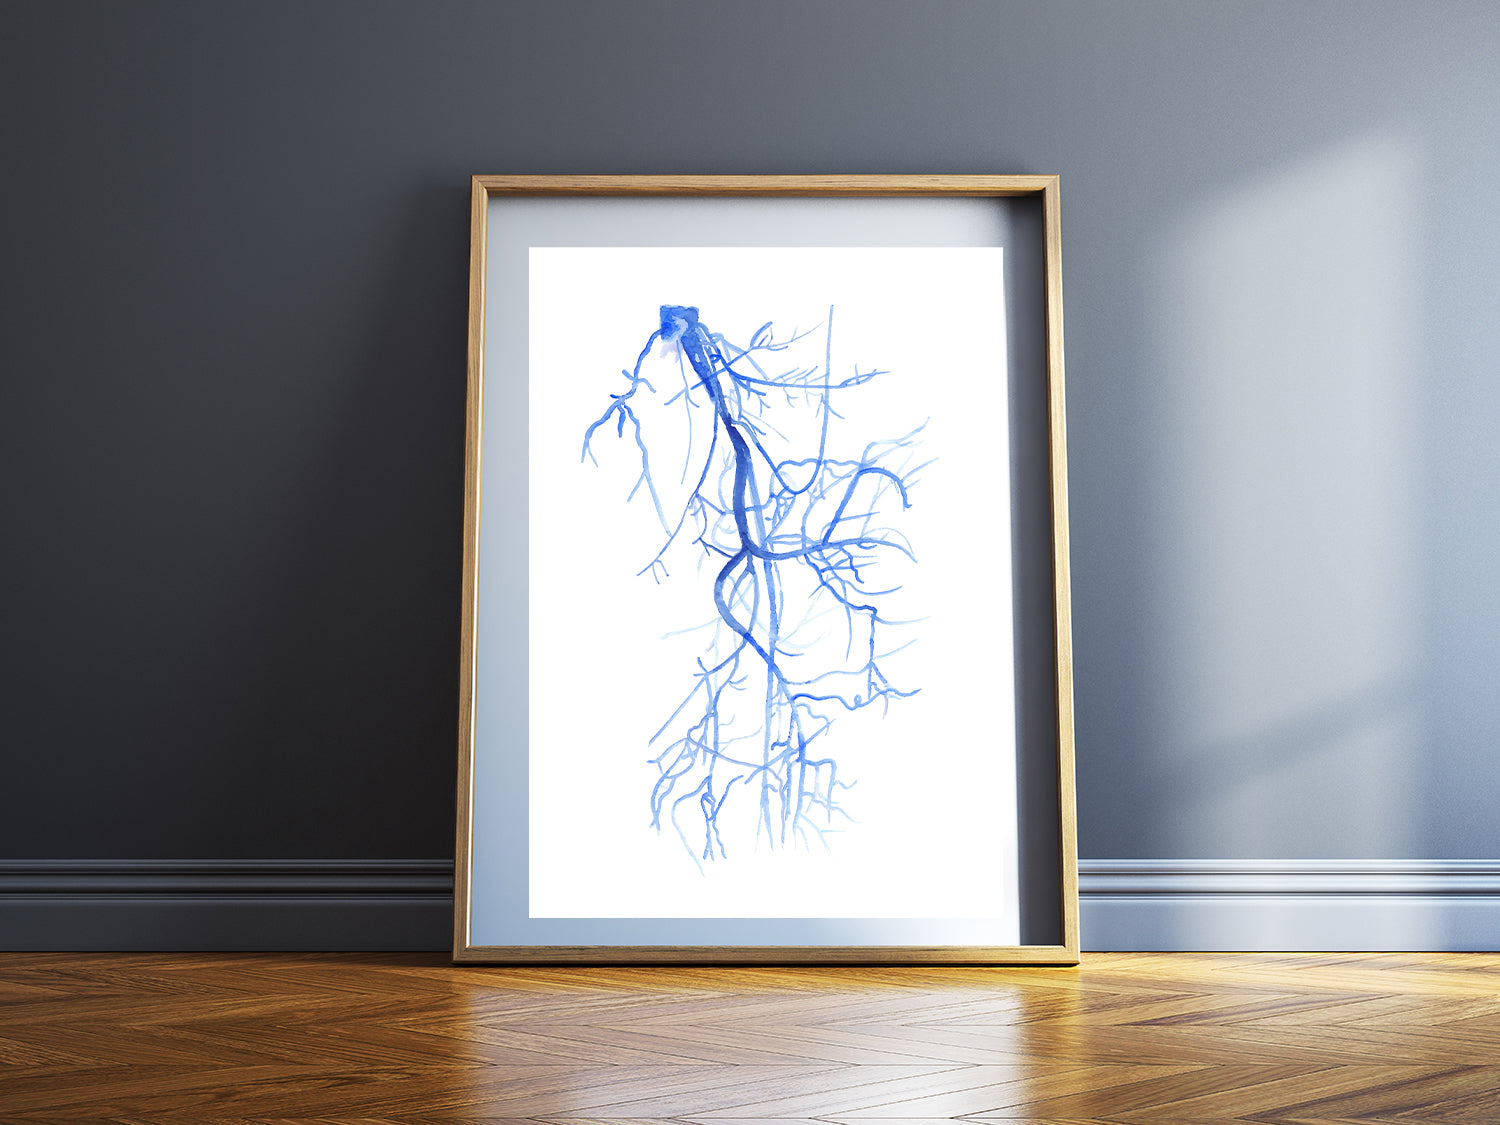 Lower Limb Angiography, Iliofemoral Section, Vascular Surgery and Radiology Art Print